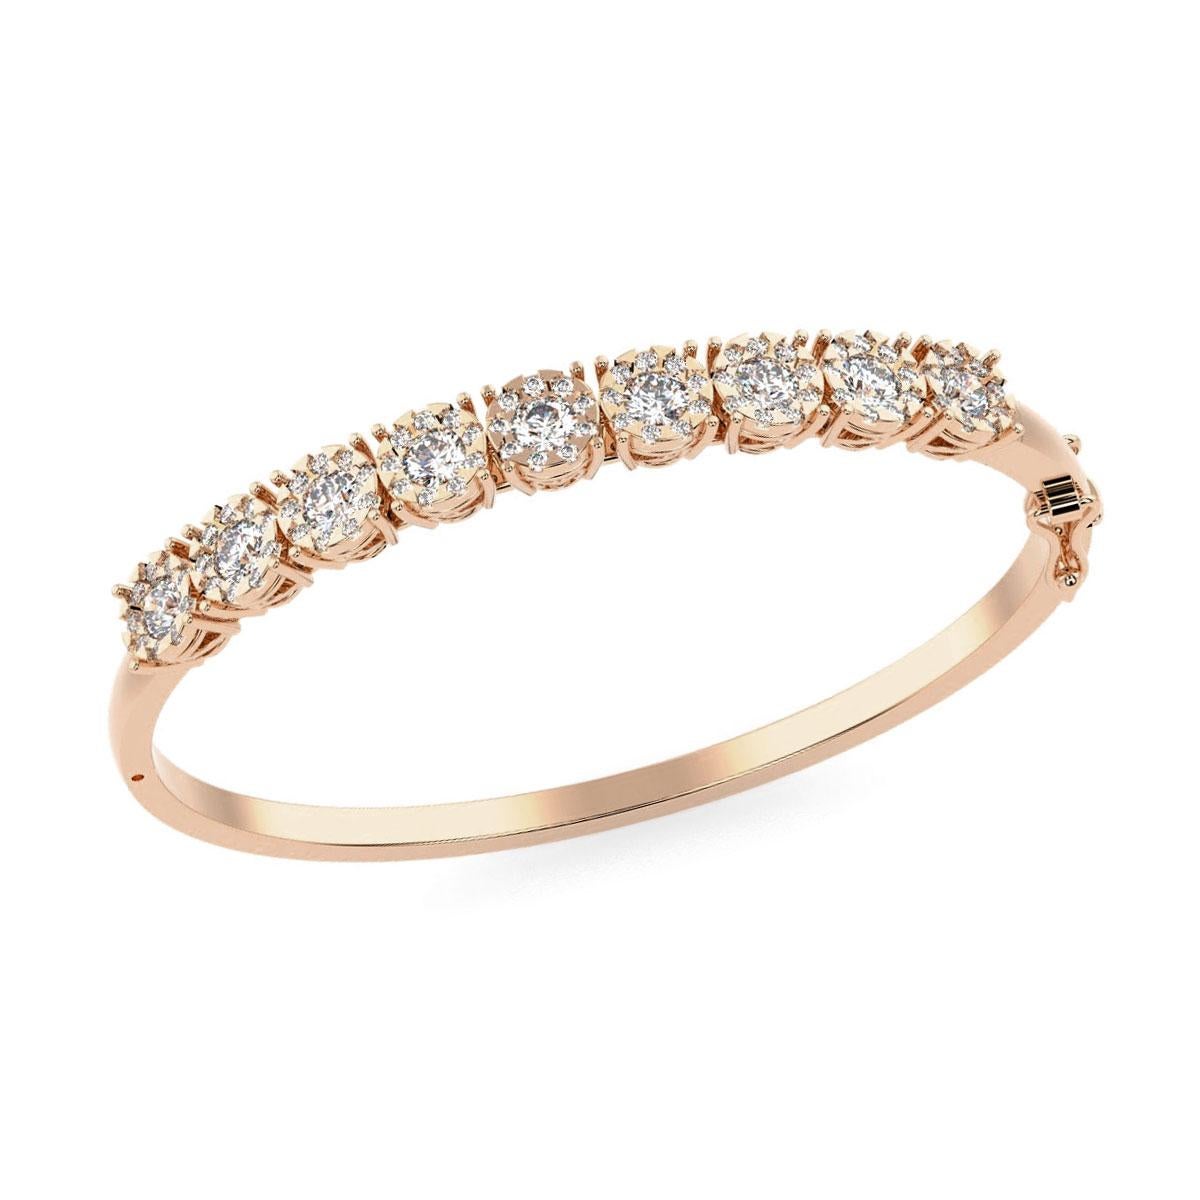 18 Karat Rose Gold Halo Diamond Bangle '3 1/4 Carat' In New Condition For Sale In San Francisco, CA